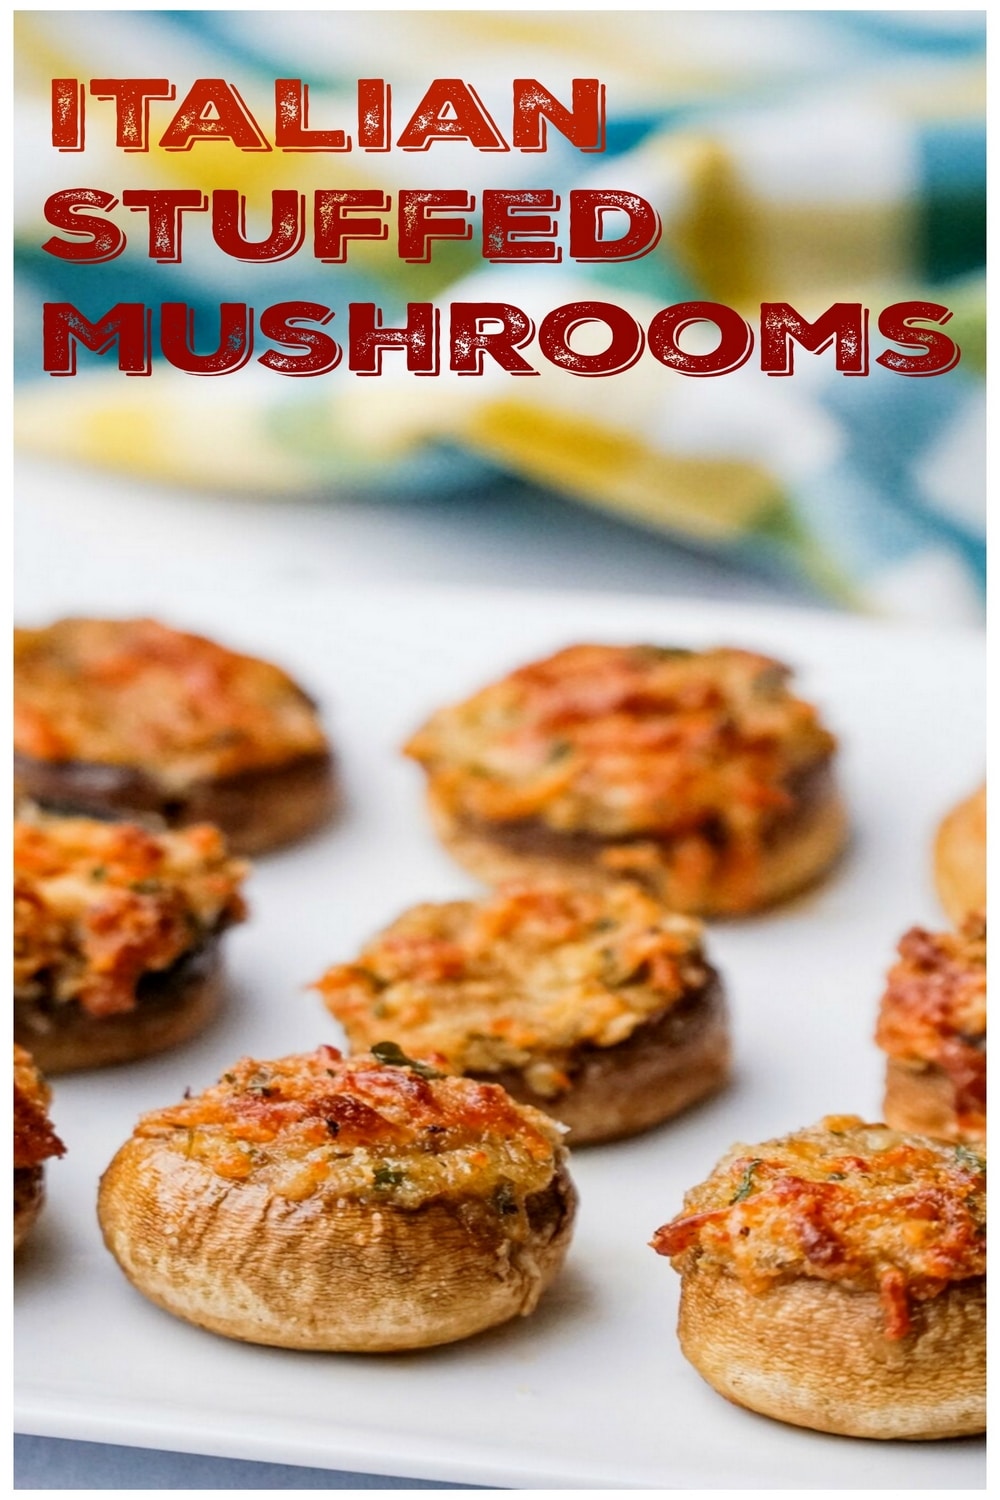 There are countless stuffed mushroom recipes, but this Italian seasoned one is my top pick. It's straightforward to put together, yet bursting with flavor. This recipe yields 24 bite-sized stuffed mushrooms, and it's a breeze to adjust for even larger batches. They disappear quickly, so it's wise to make extras! via @cmpollak1